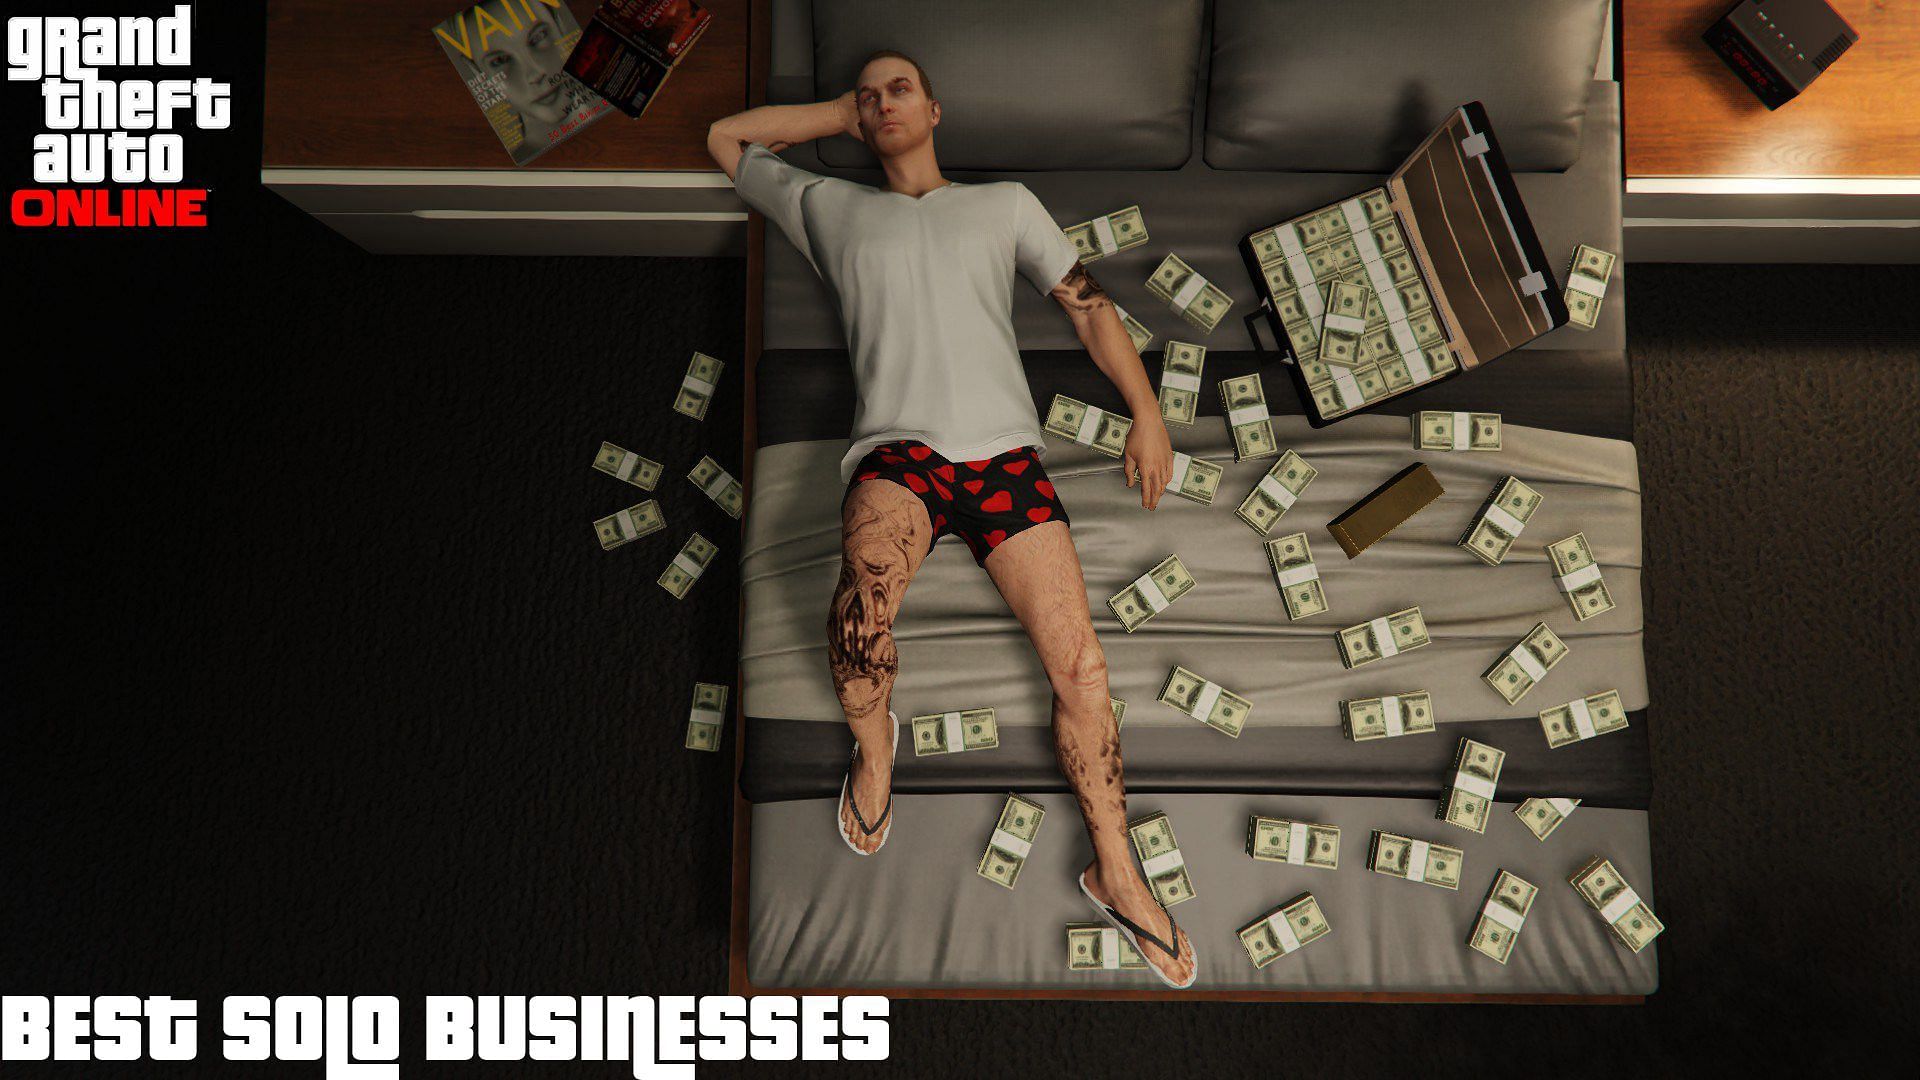 GTA Online features multiple businesses, and some are suited more towards solo players (Image via Sportskeeda)